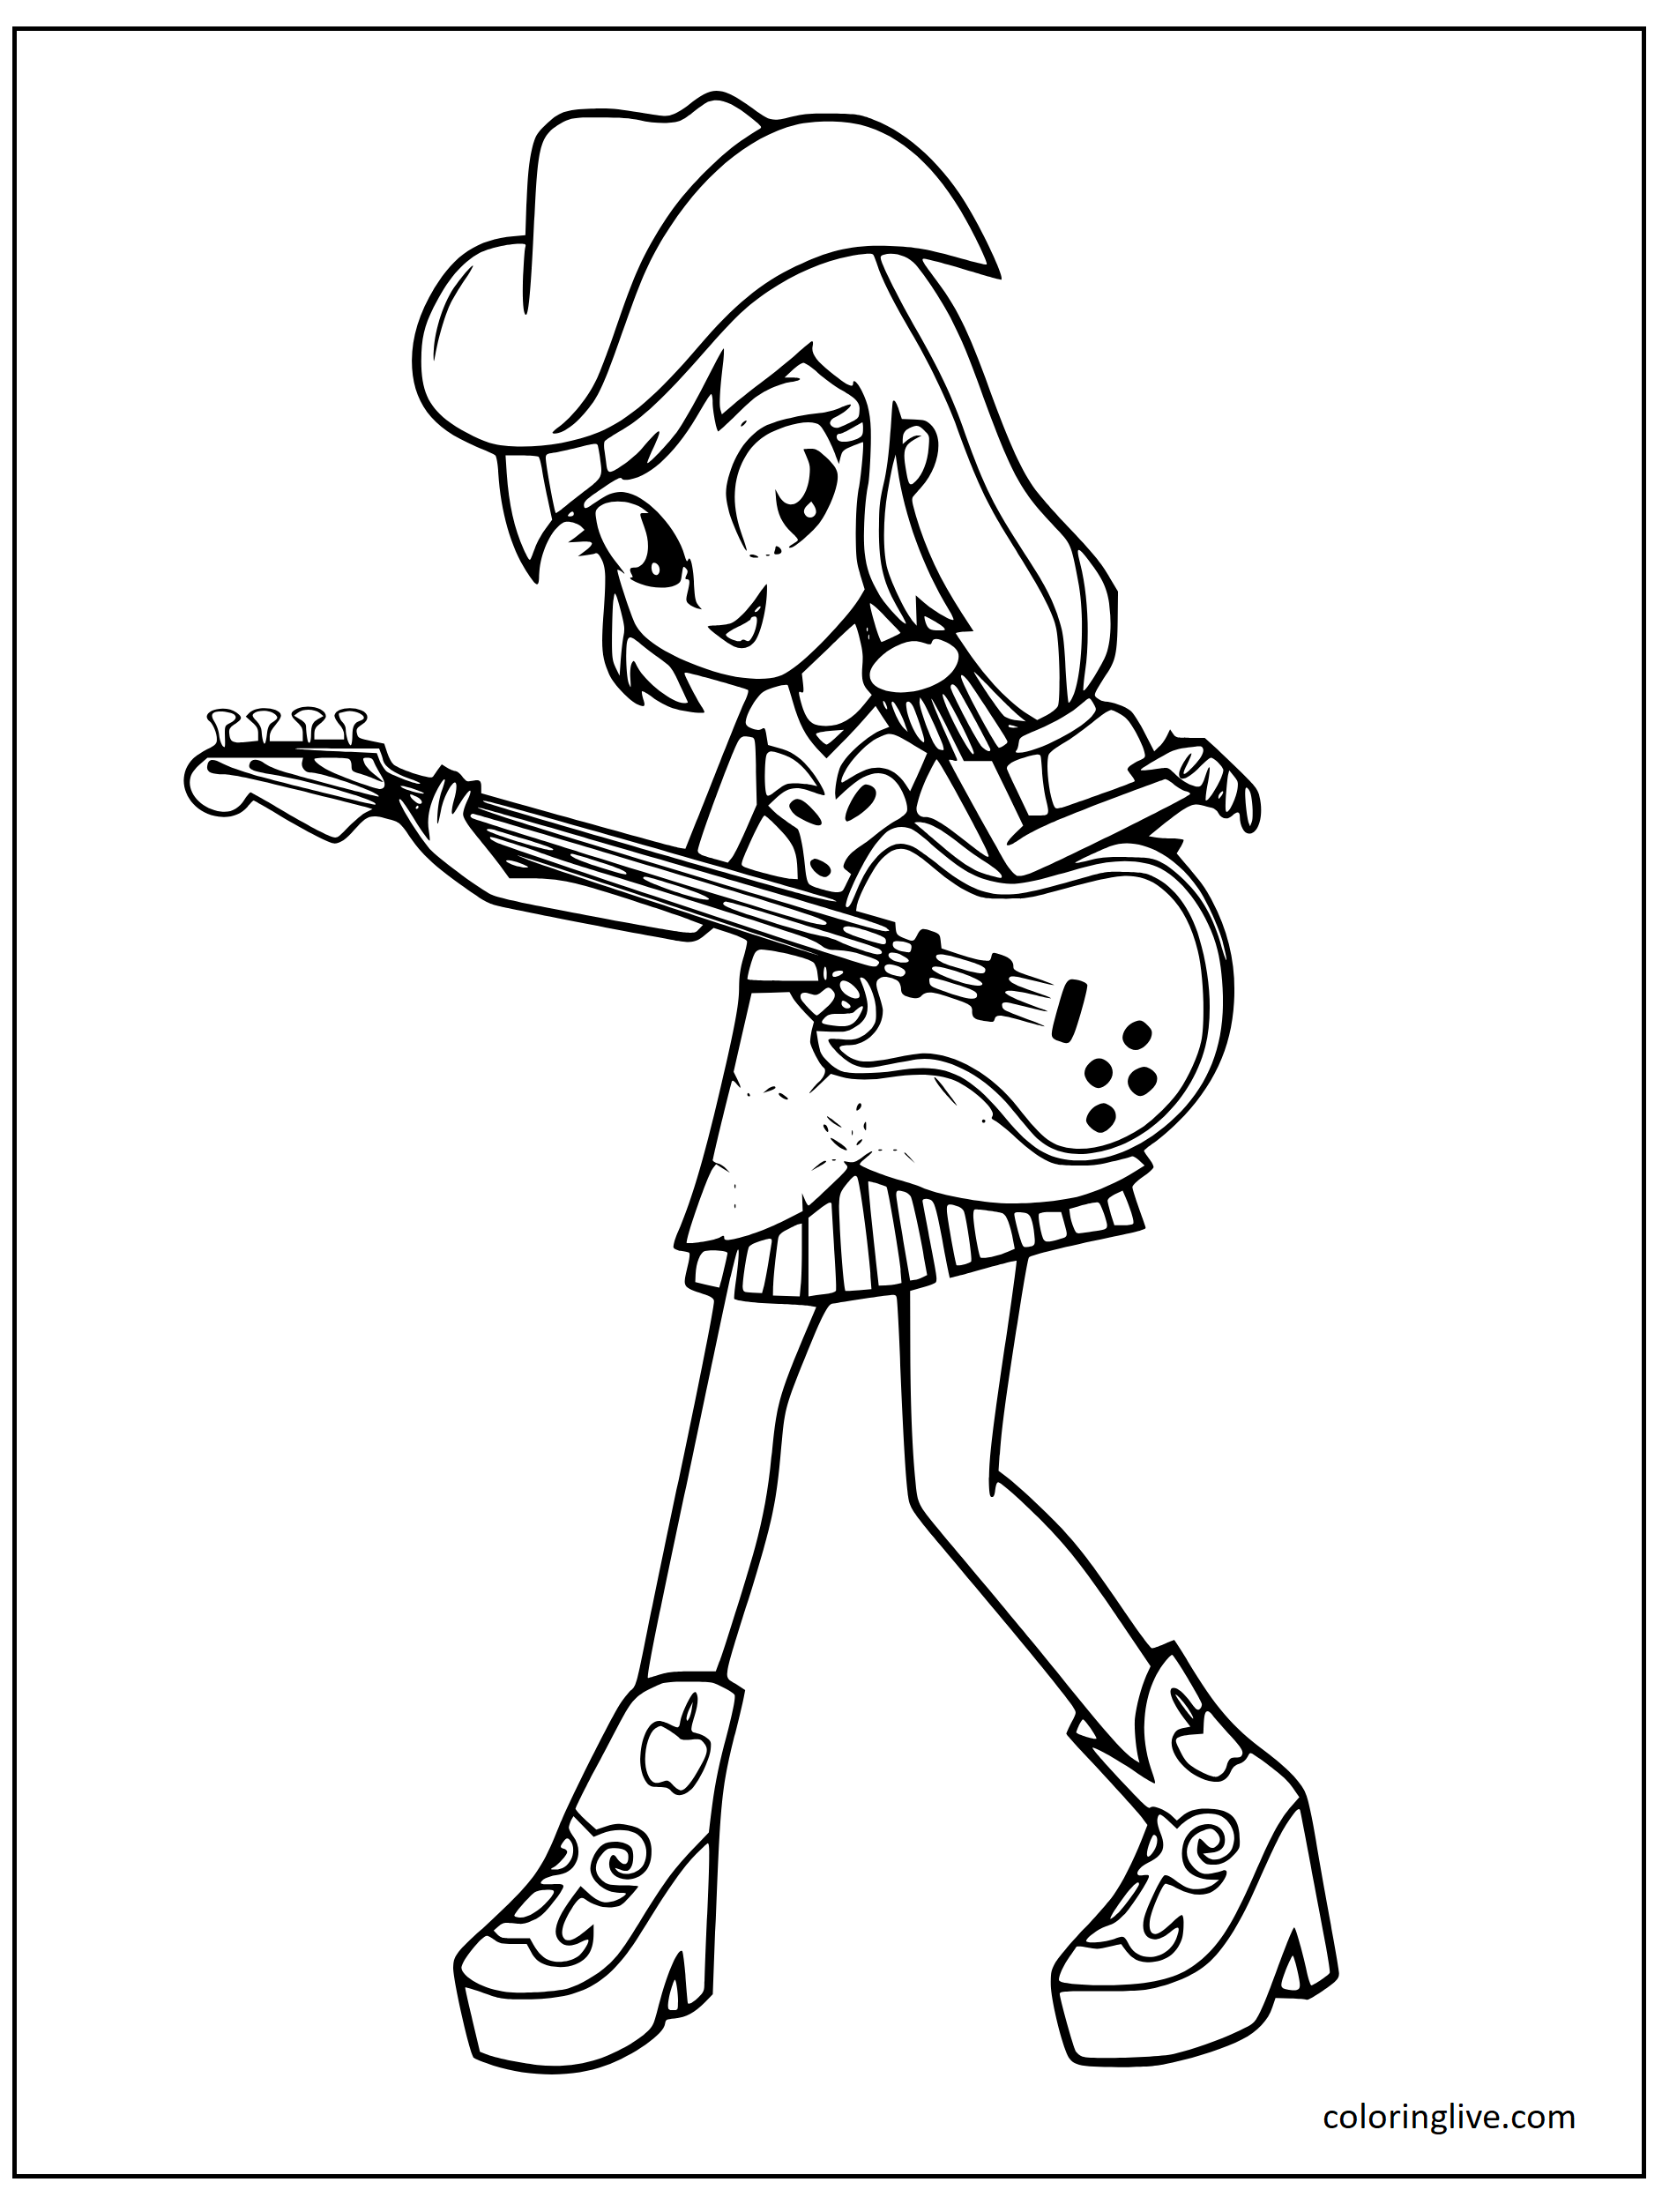 MLP Equestria Girls Coloring Pages 1